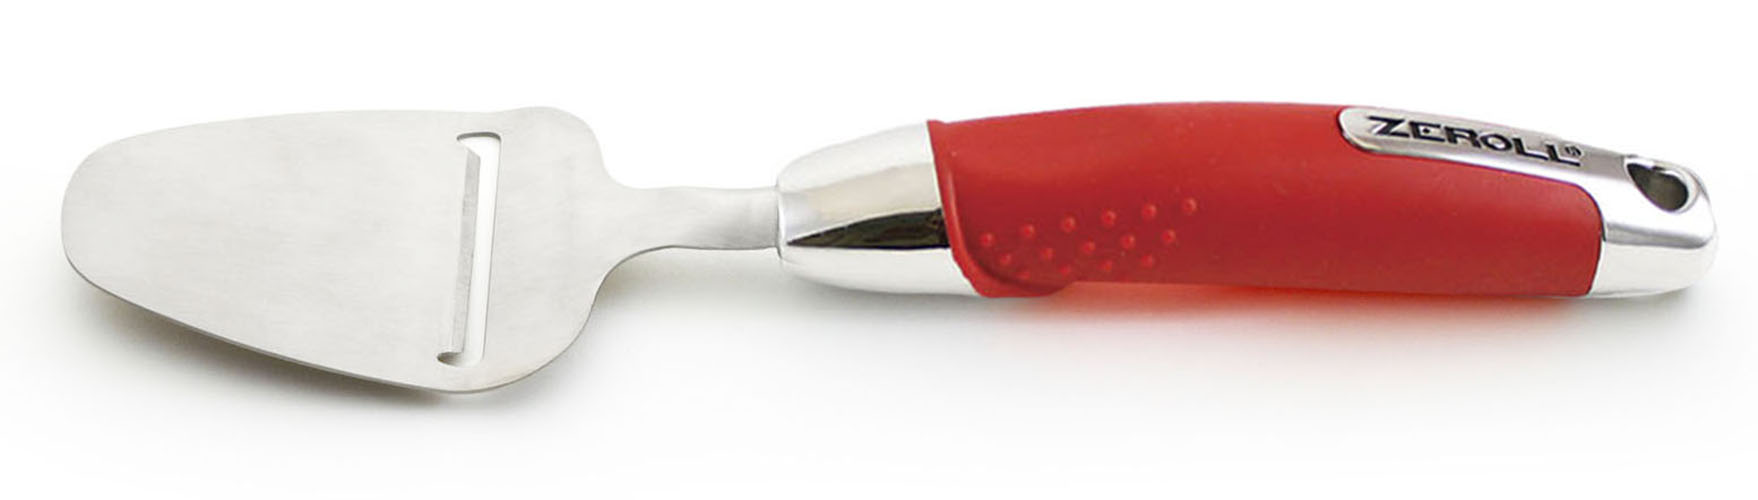 0845035008962 - USSENTIALS STAINLESS STEEL CHEESE PLANER - APPLE RED